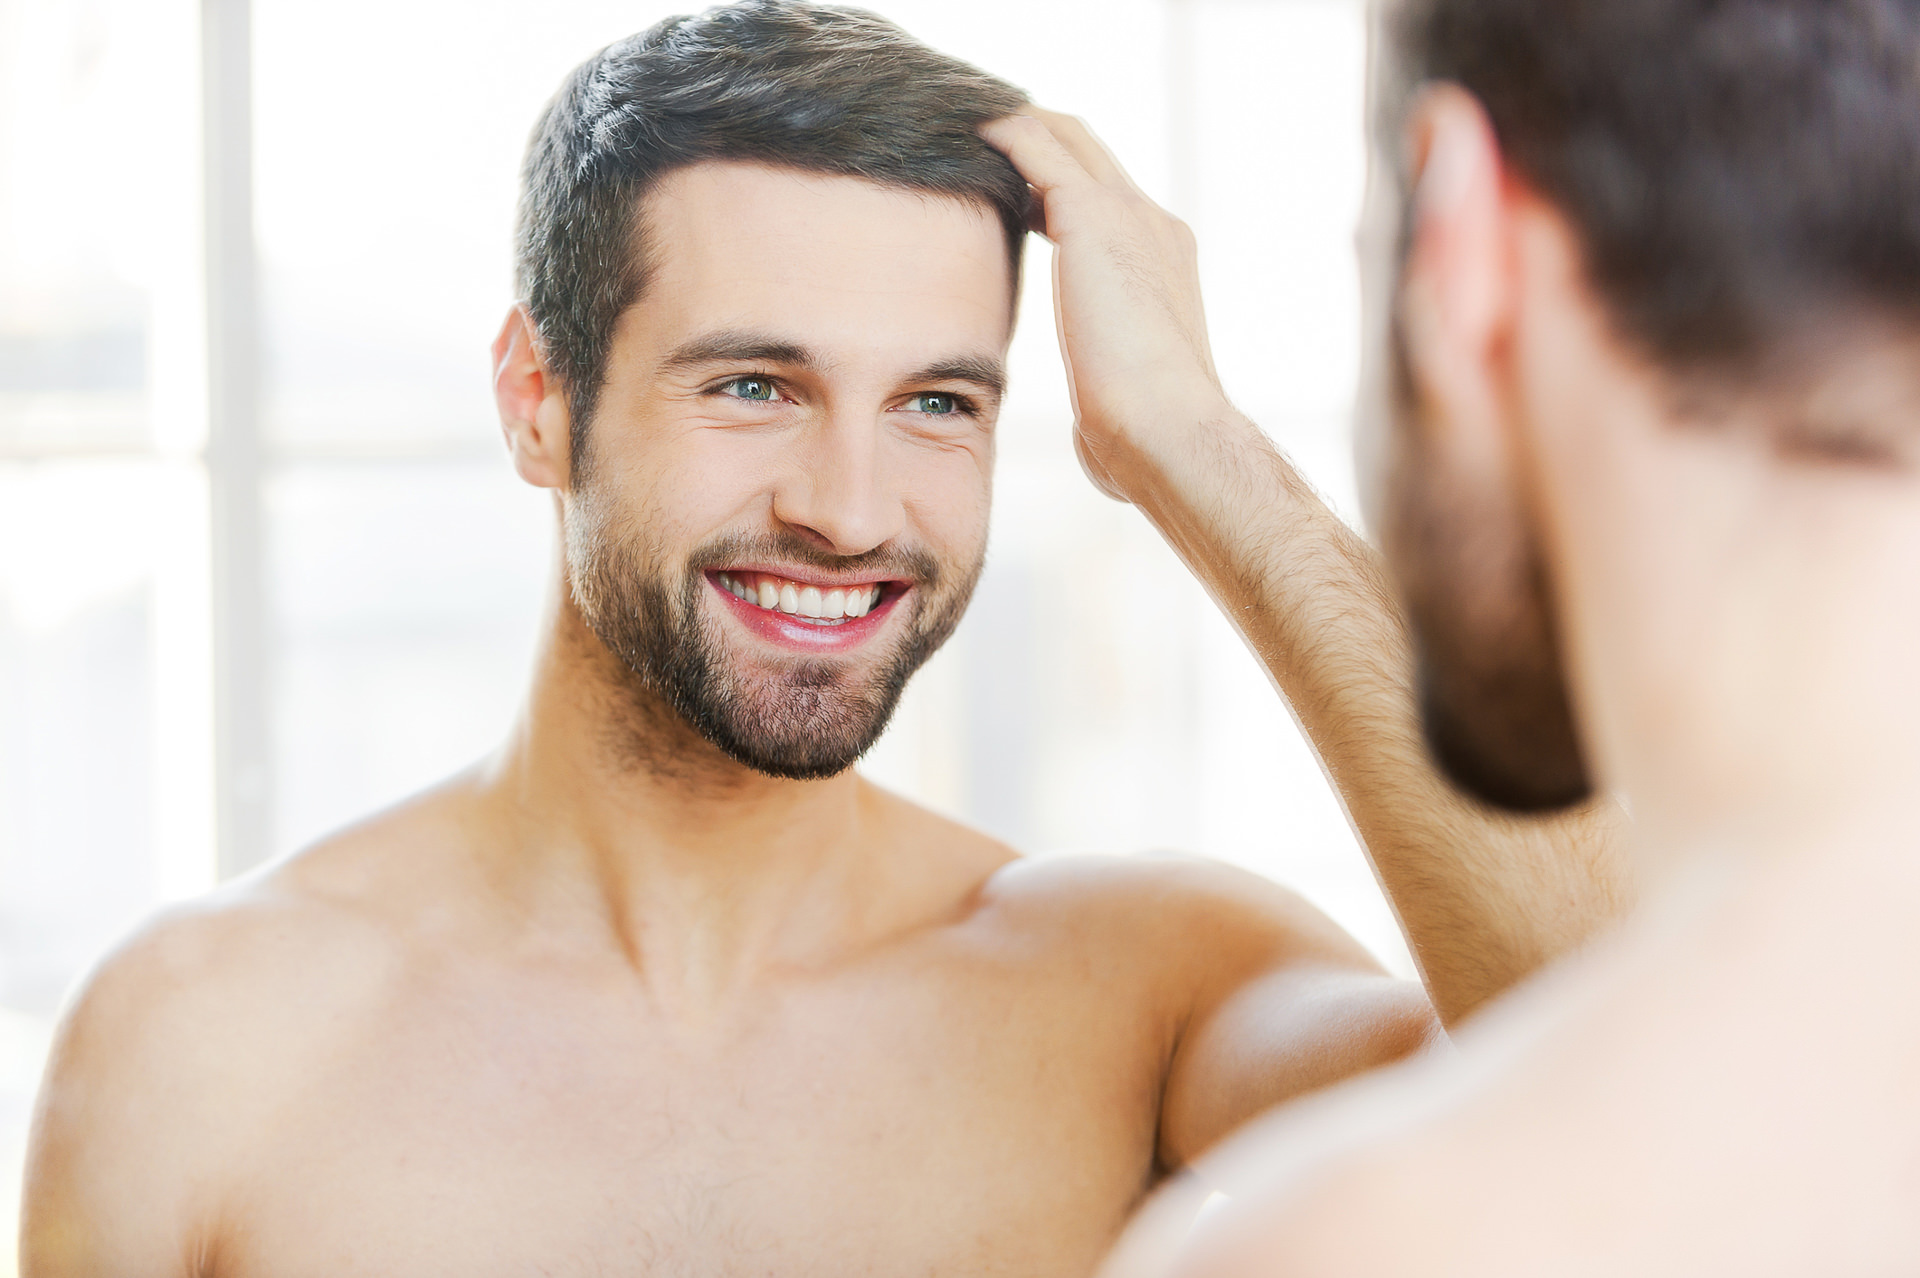 A man smiling in front of the mirror